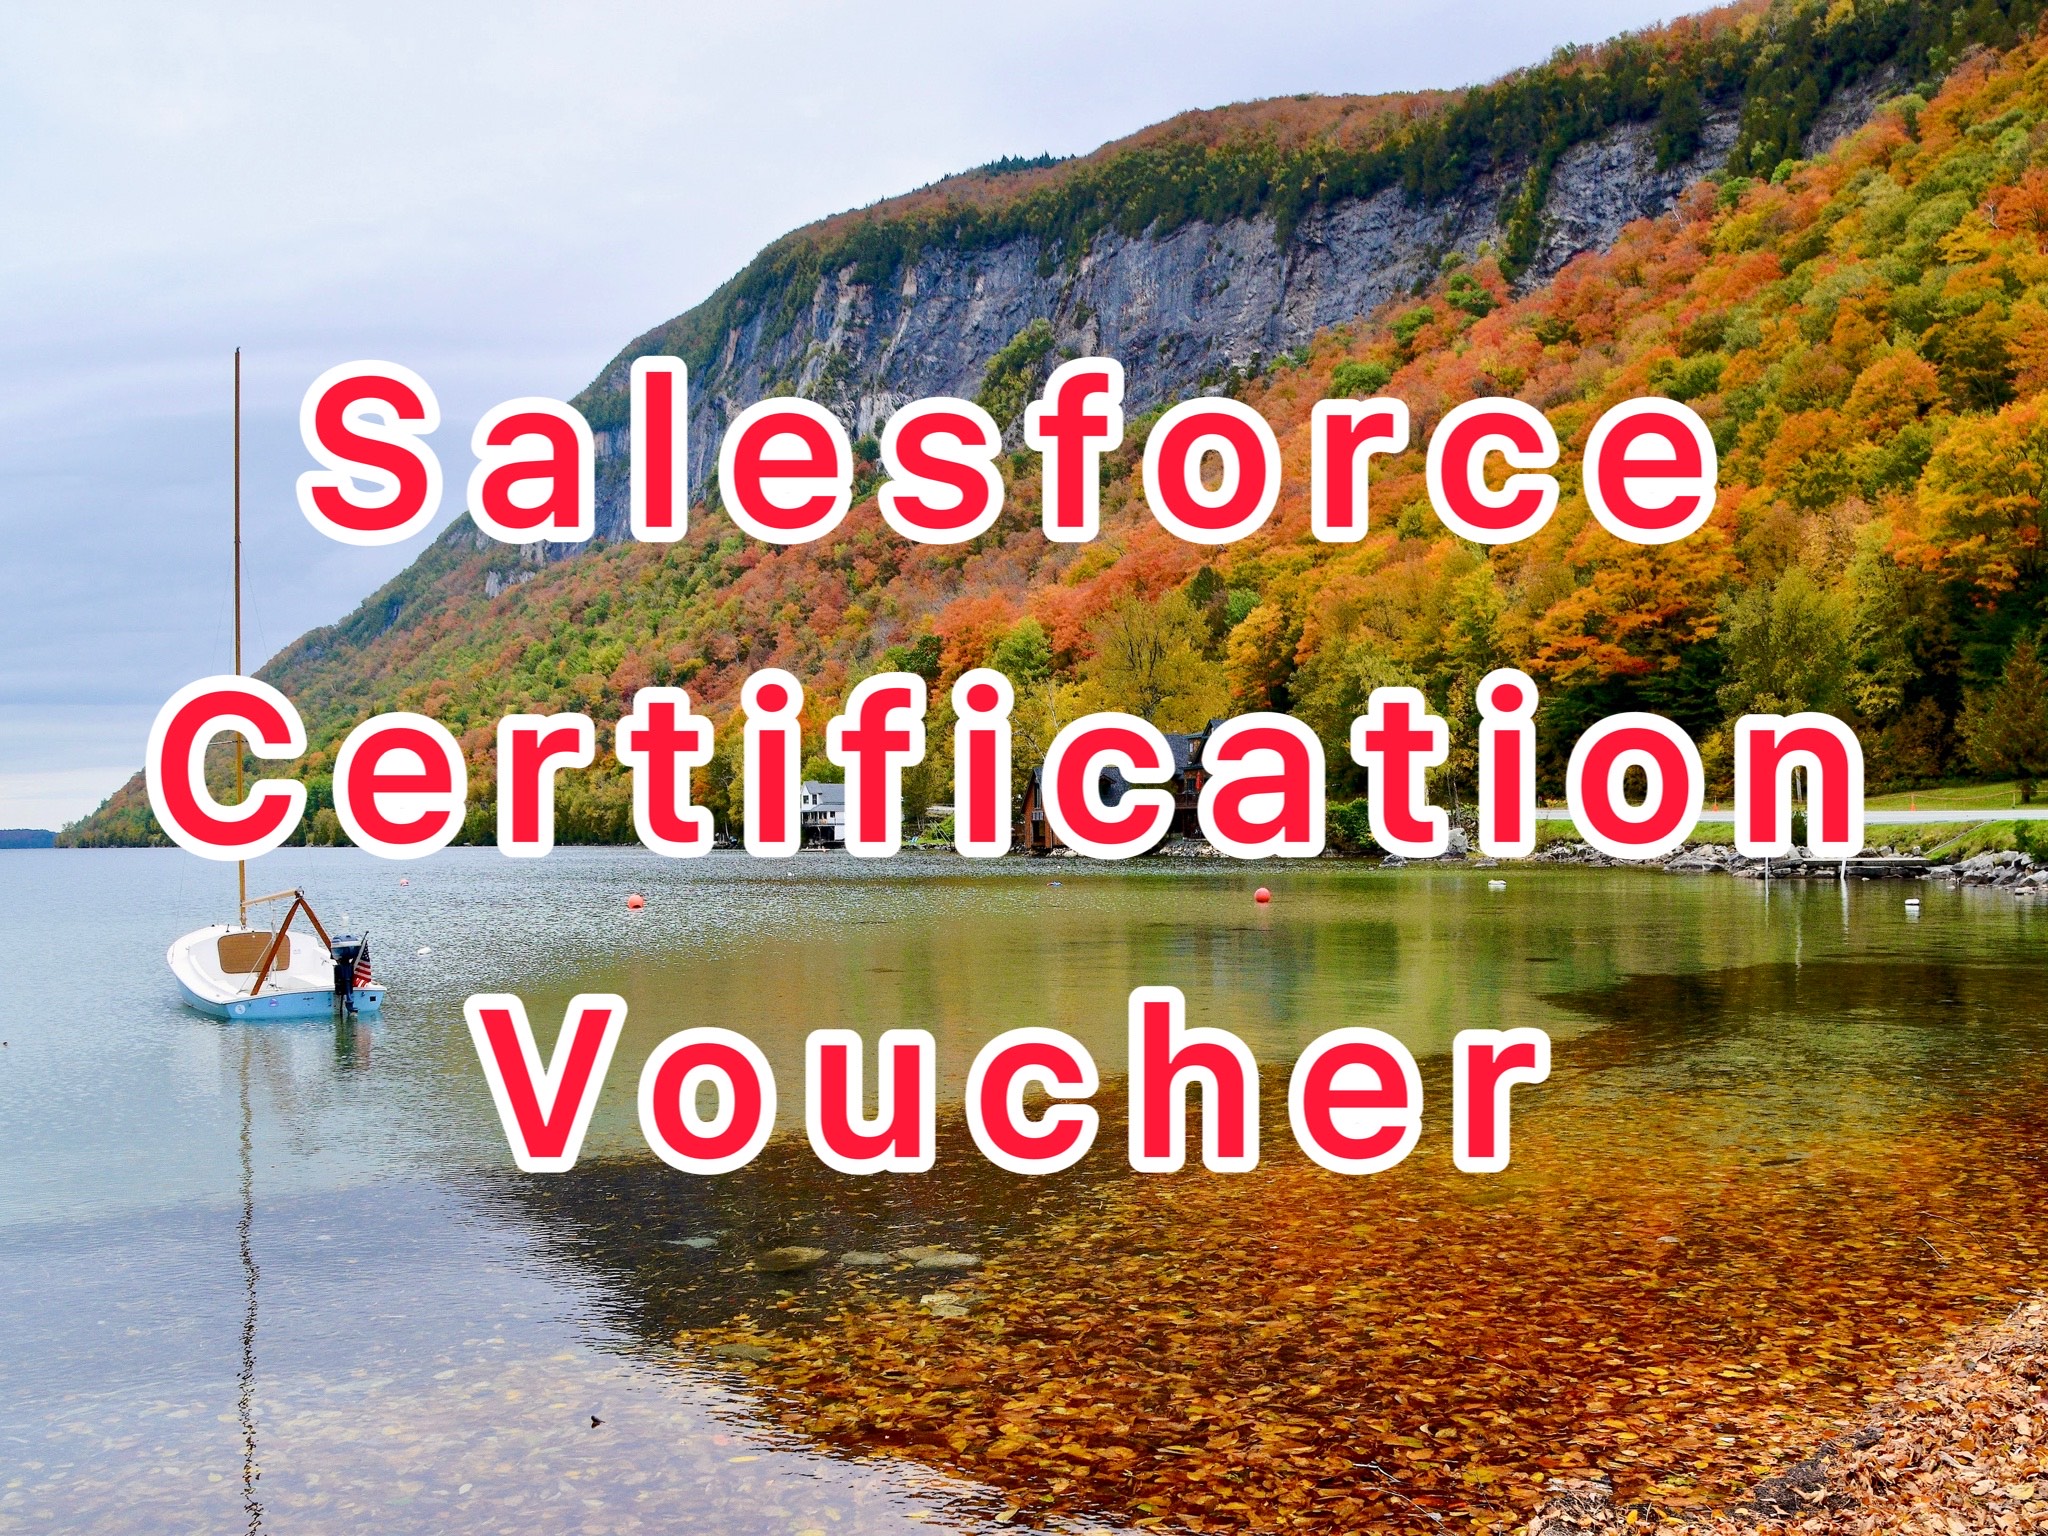 1. Salesforce Certification Coupon Codes and Discounts - wide 7